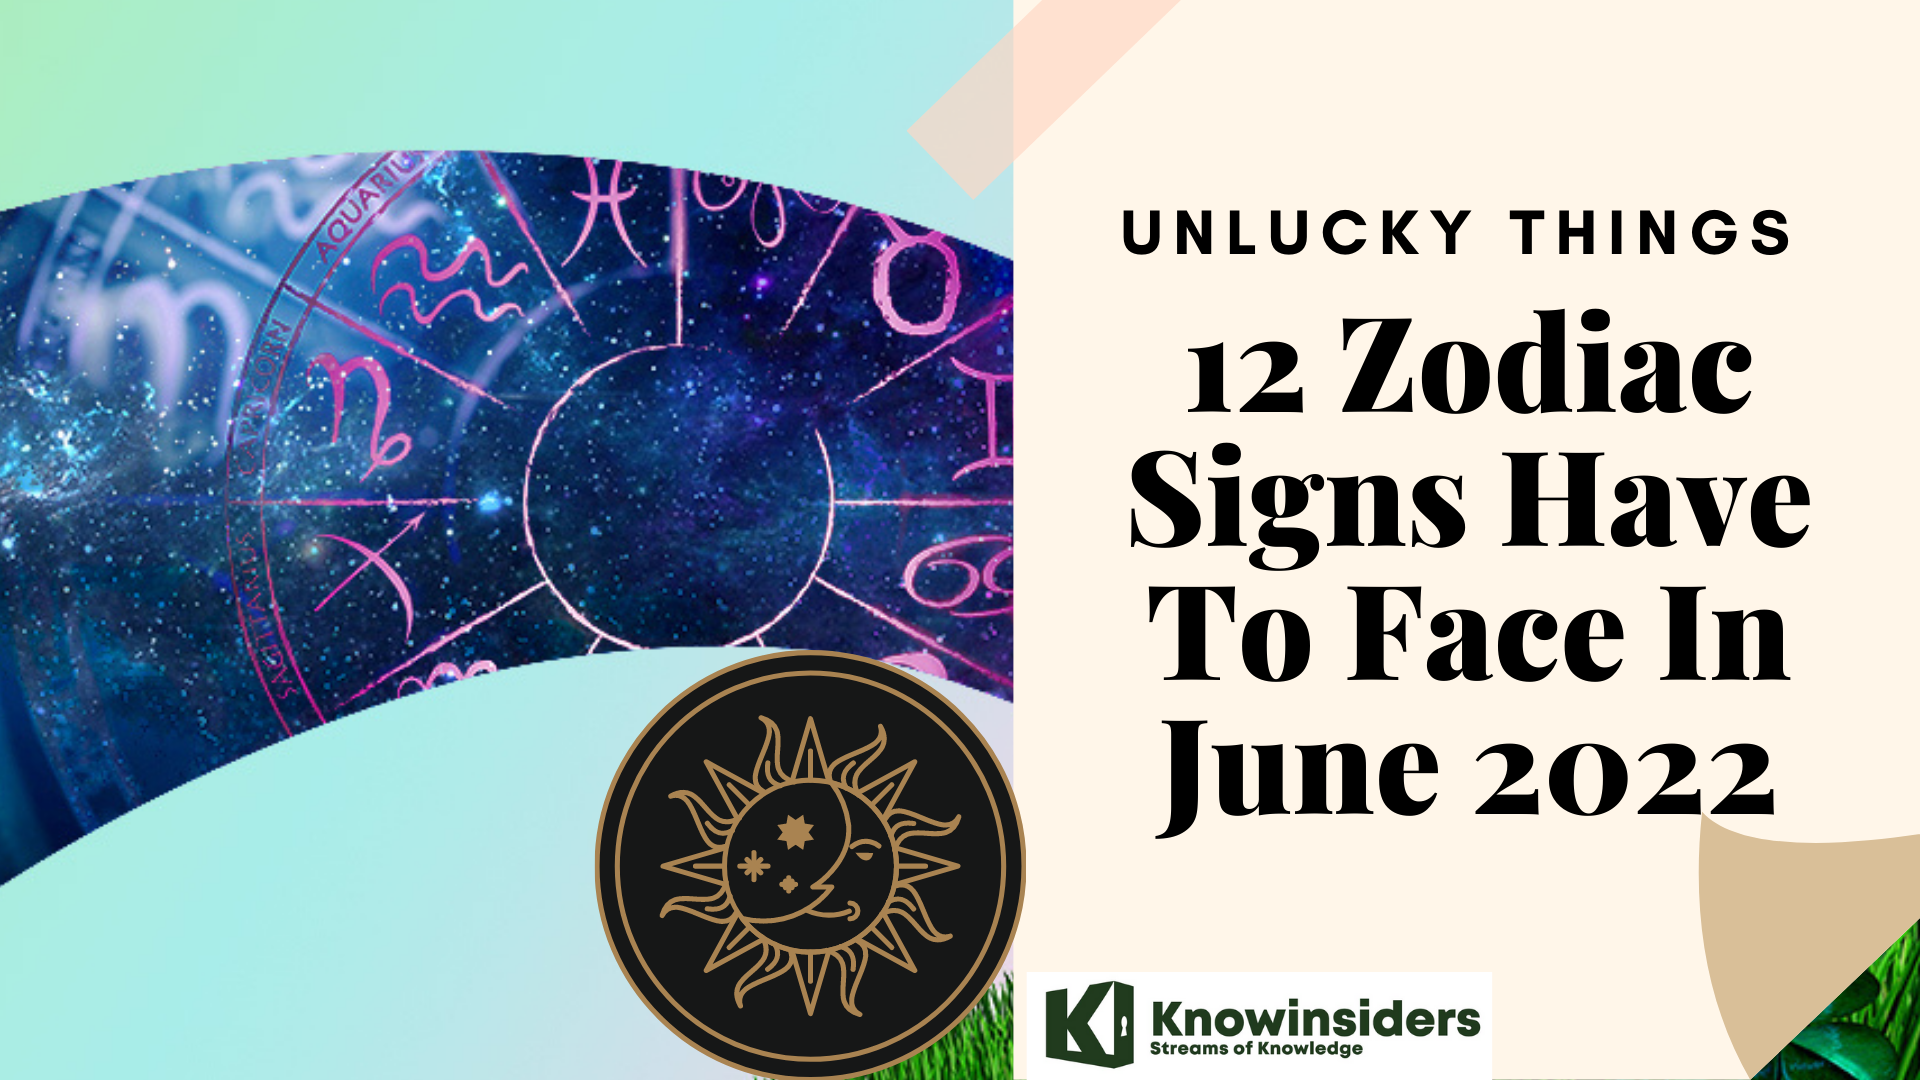 What Unlucky Things 12 Zodiac Signs Have To Face In June 2022